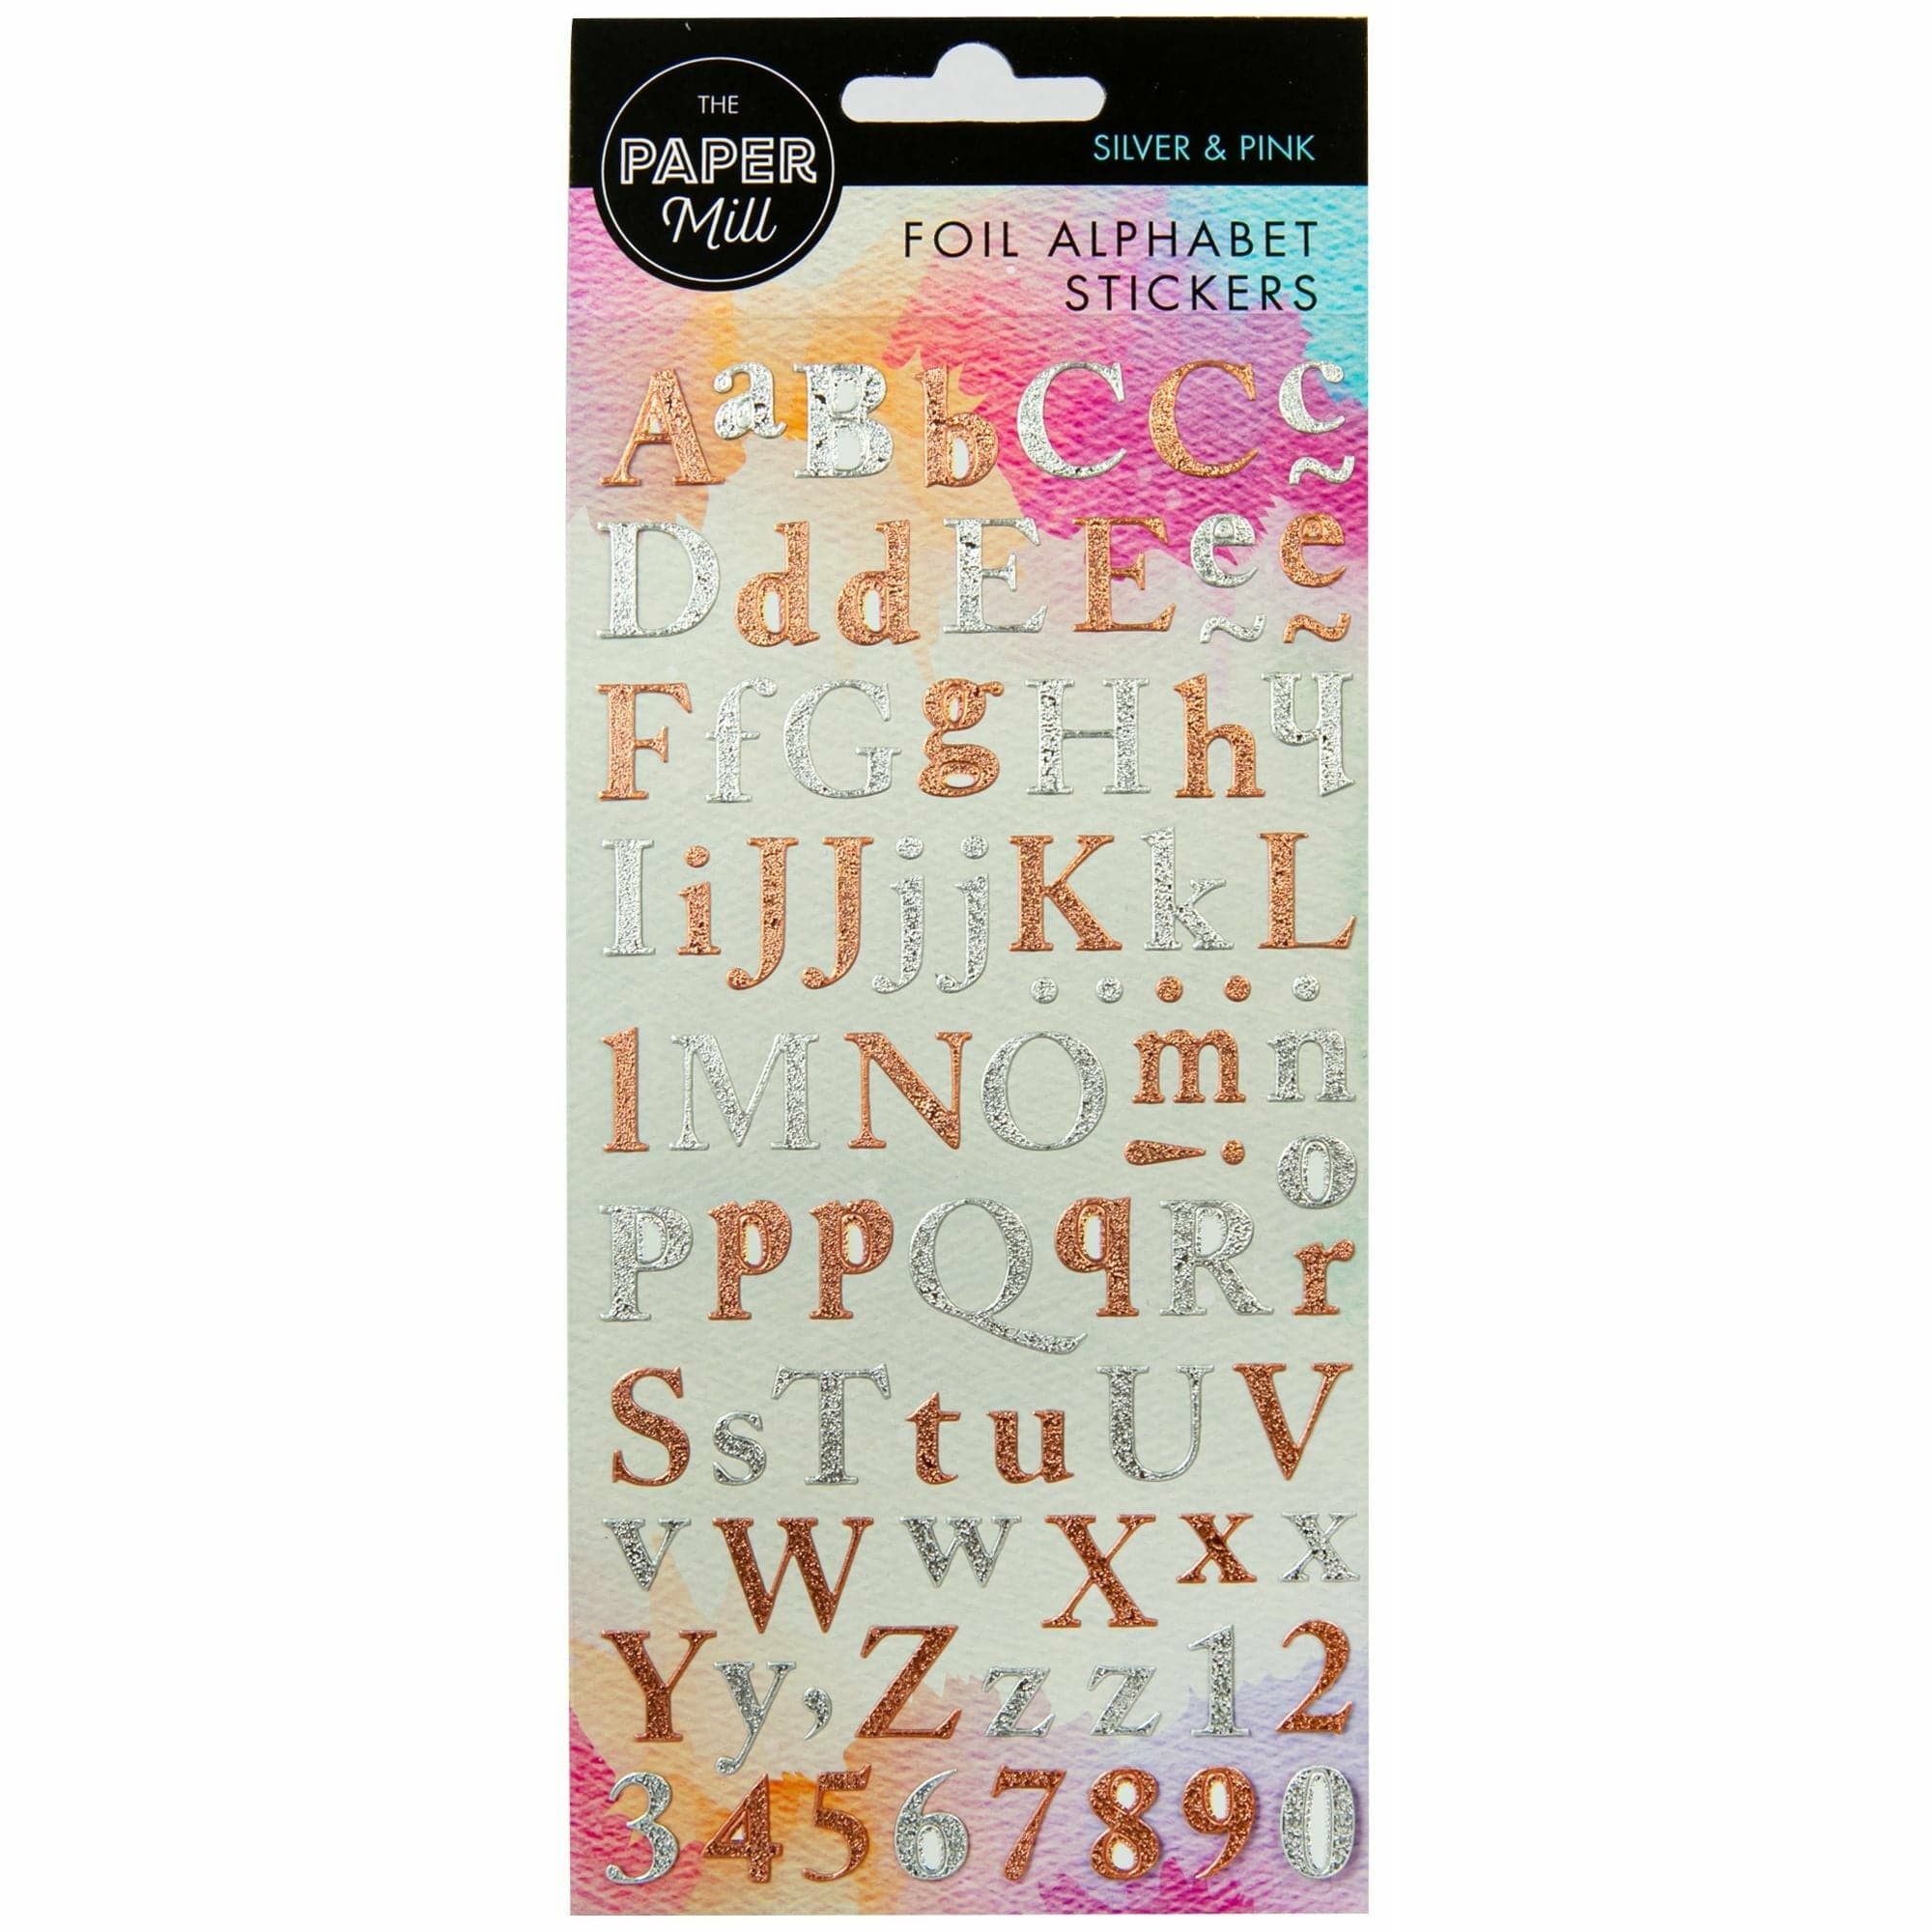 Image of The Paper Mill Foil Alphabet Stickers 240 x 106mm Silver and Pink